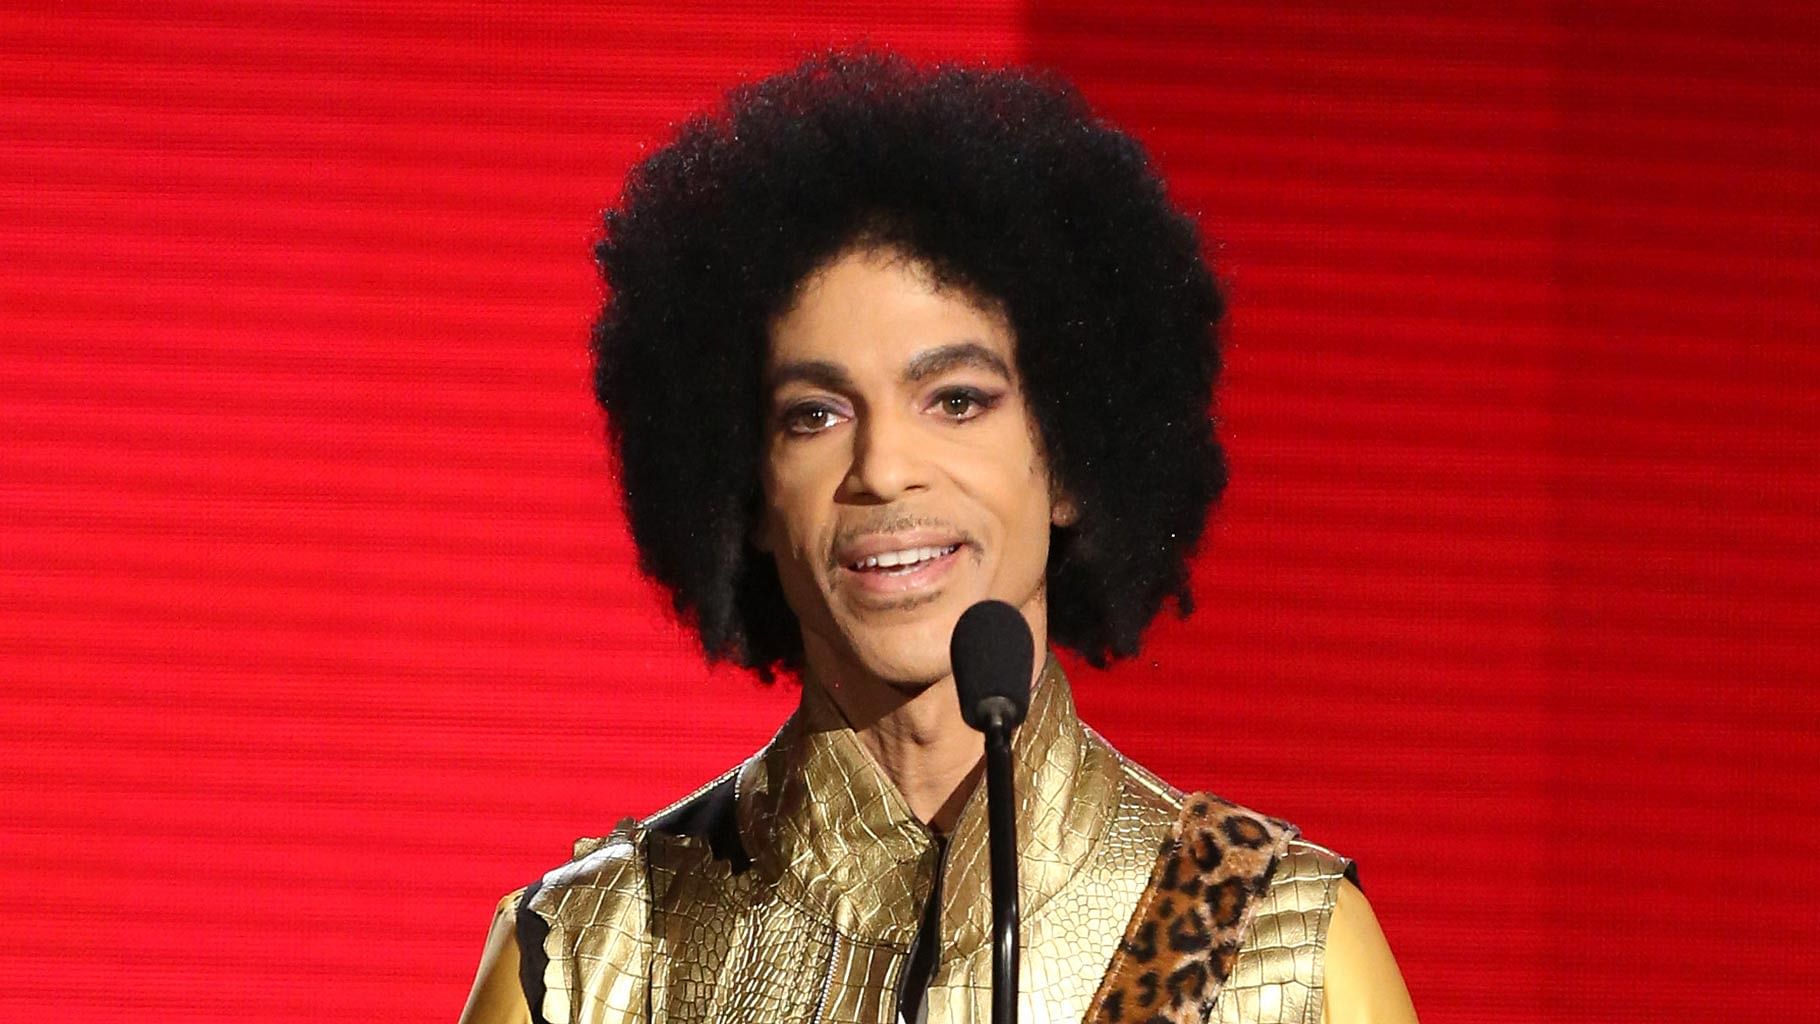 File photo of Prince presenting the award for the favourite soul/R&amp;B album at the American Music Awards in Los Angeles on 22 November 2015. (Photo: AP)